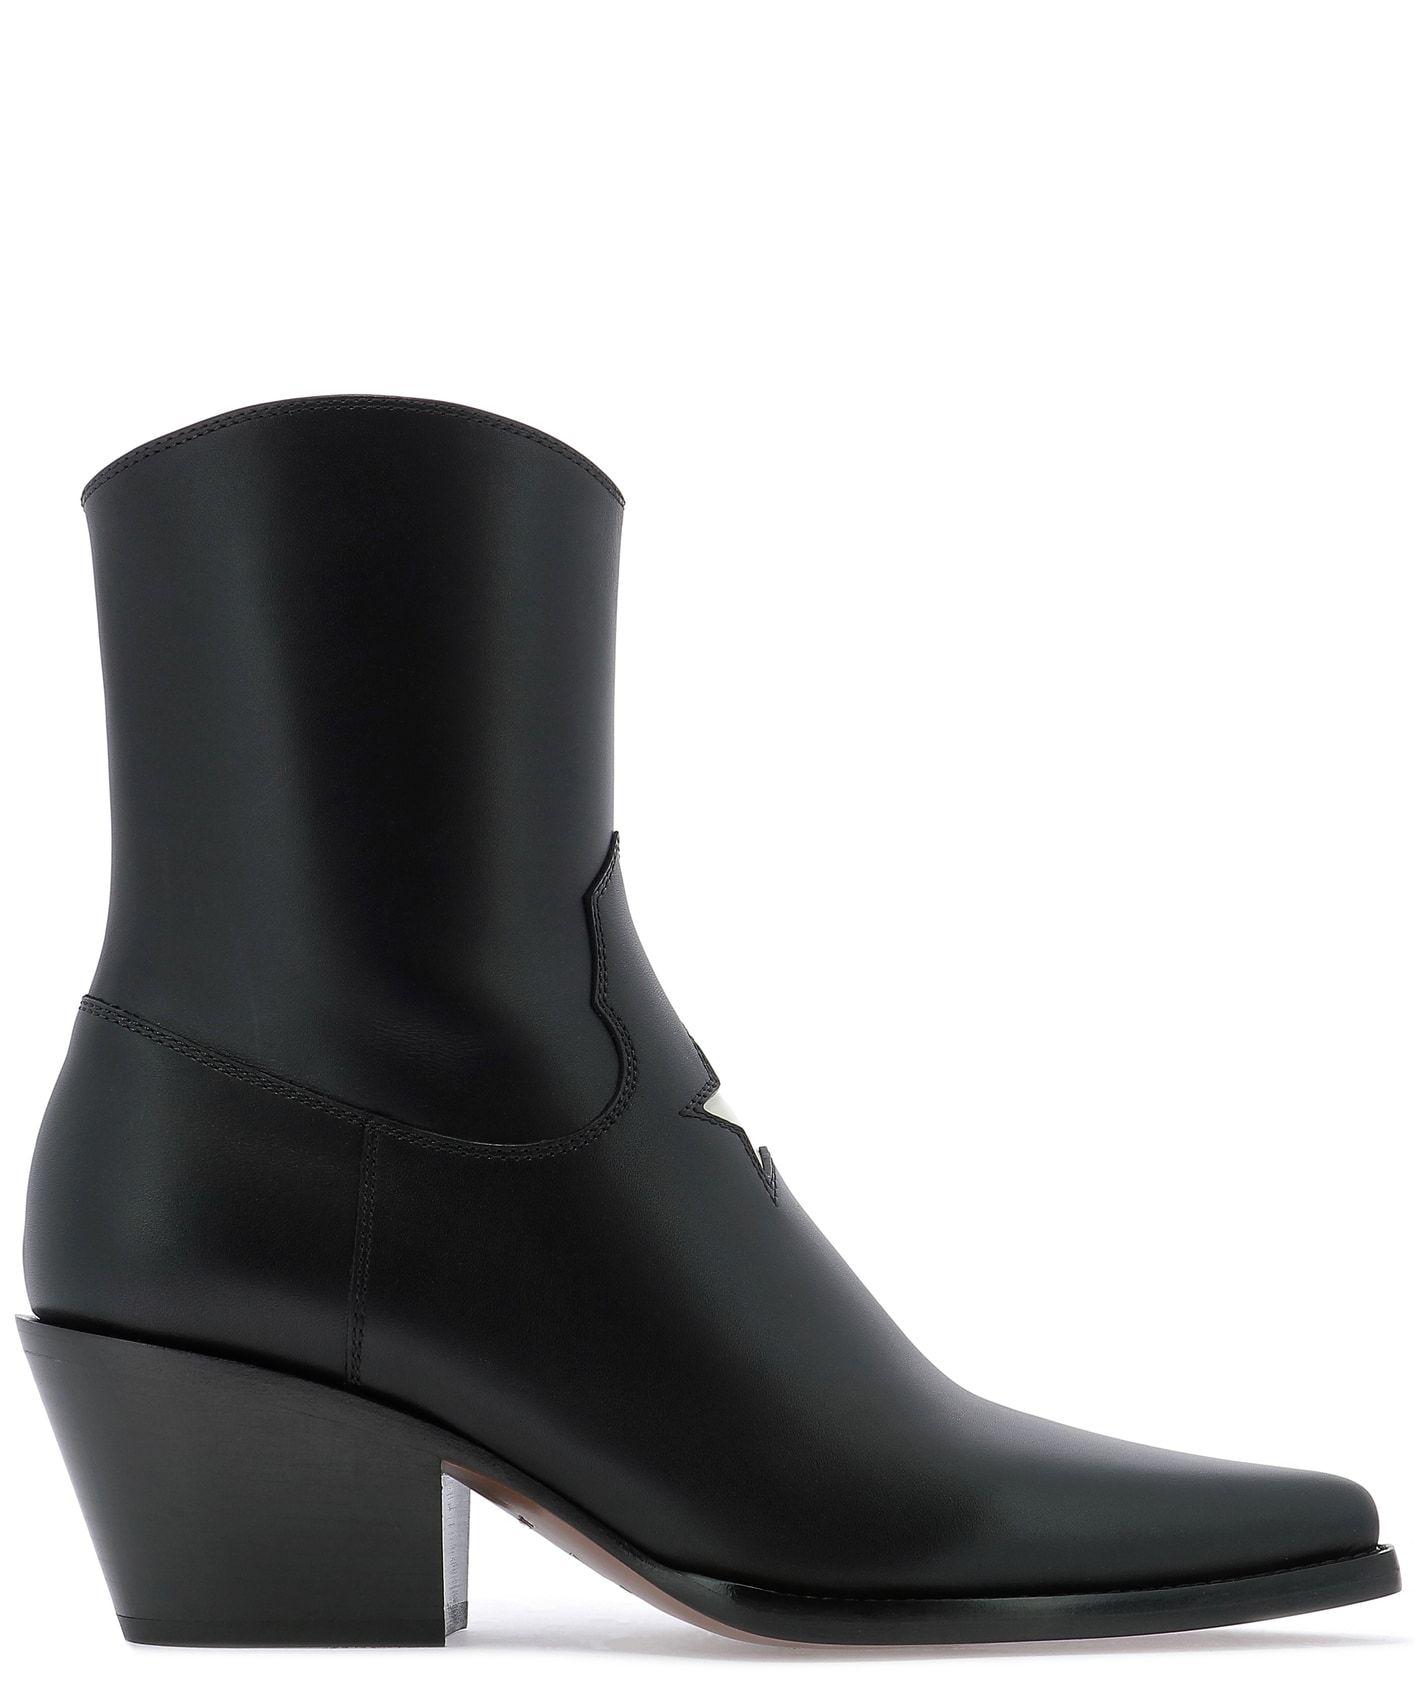 Dior L.a. Star Detail Ankle Boots in Black | Lyst